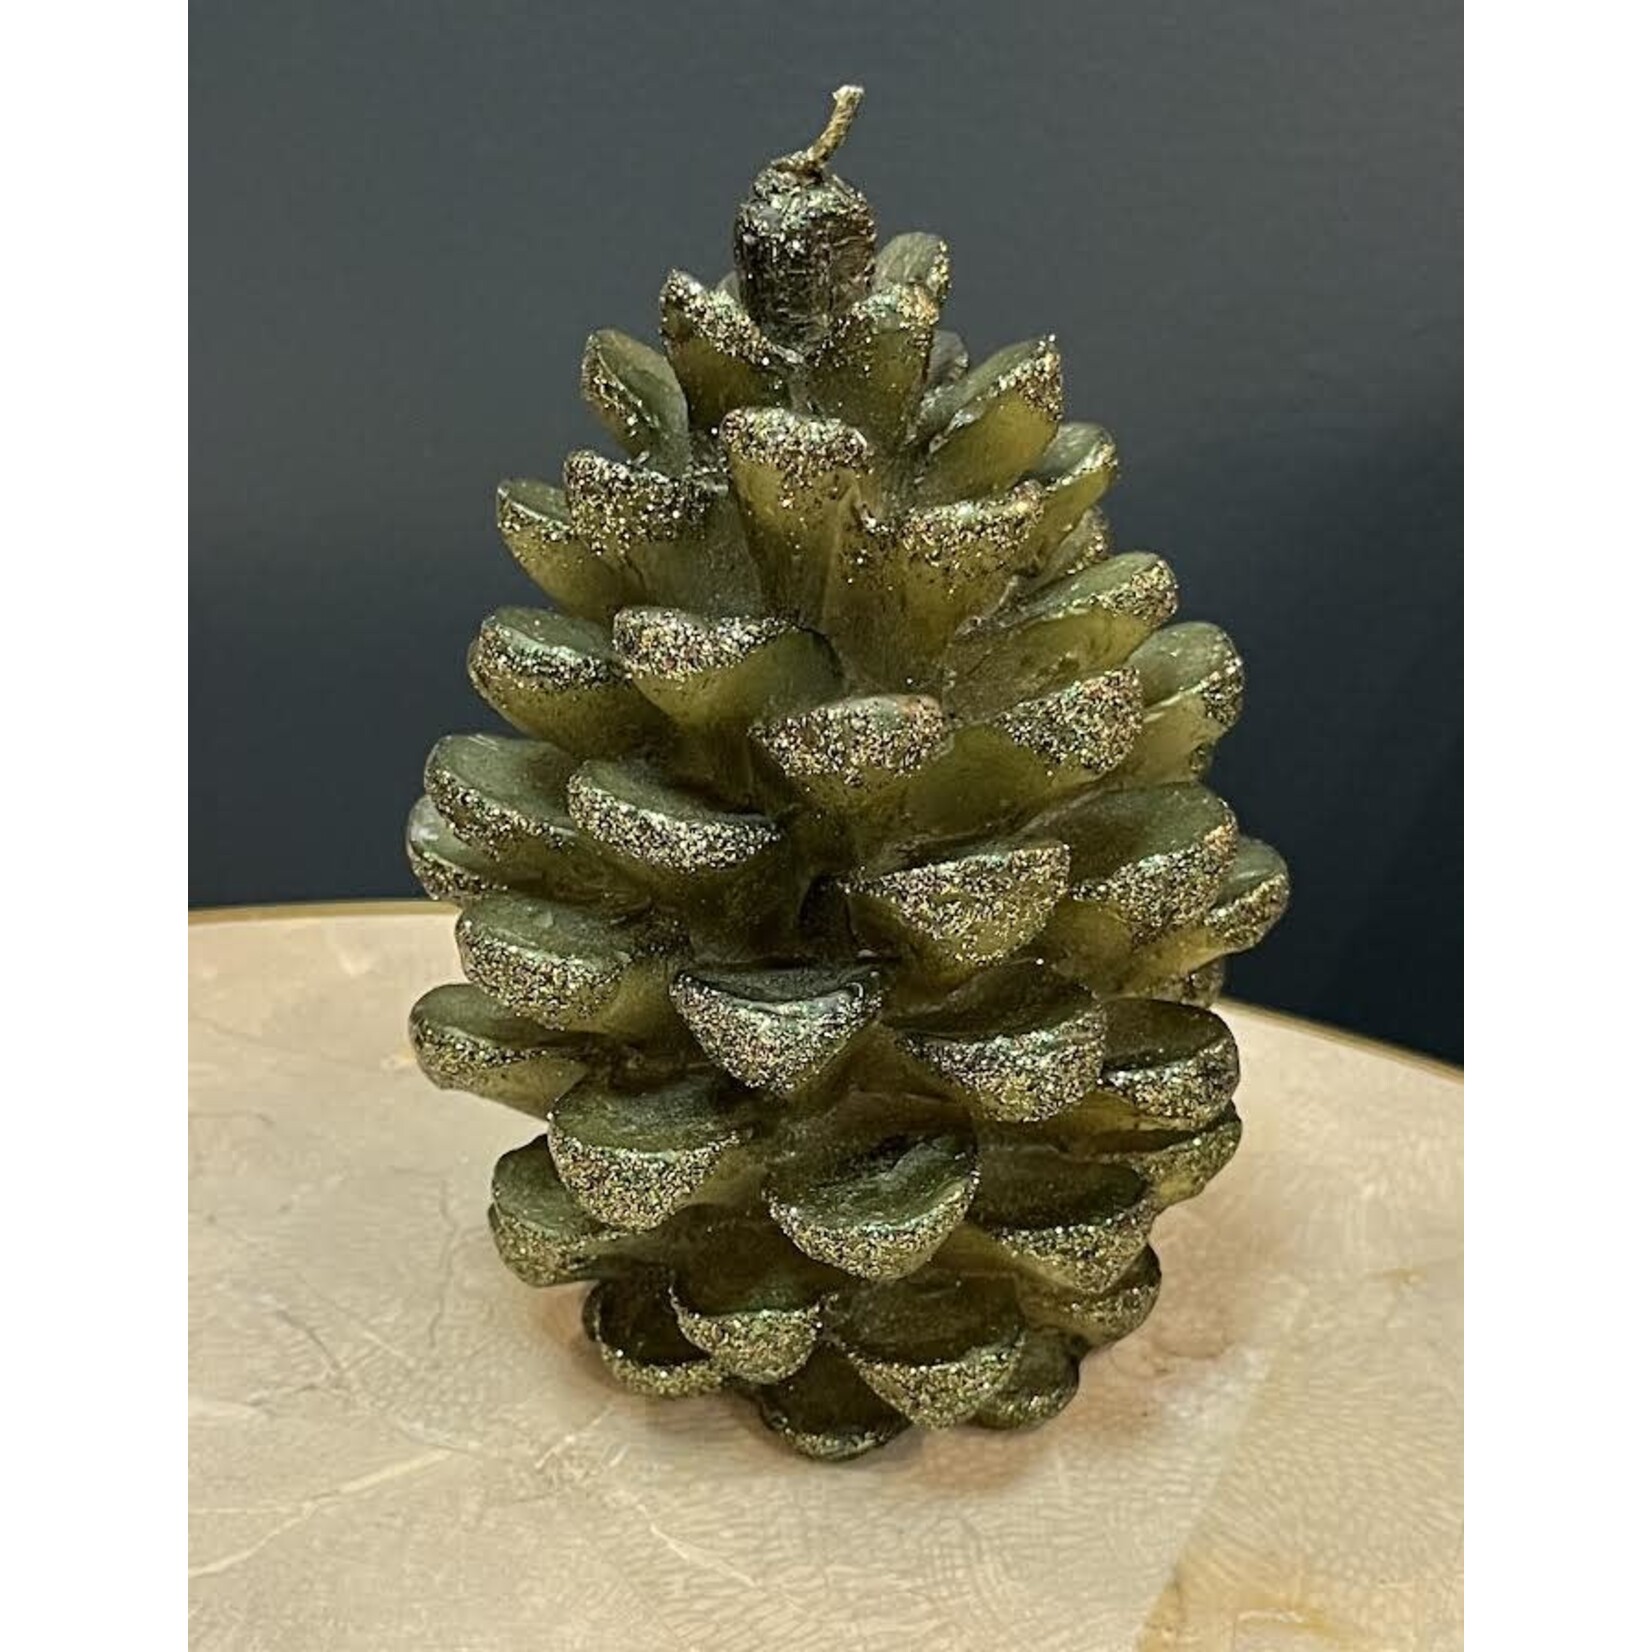 Zodax Green Pinecone Candle 7"